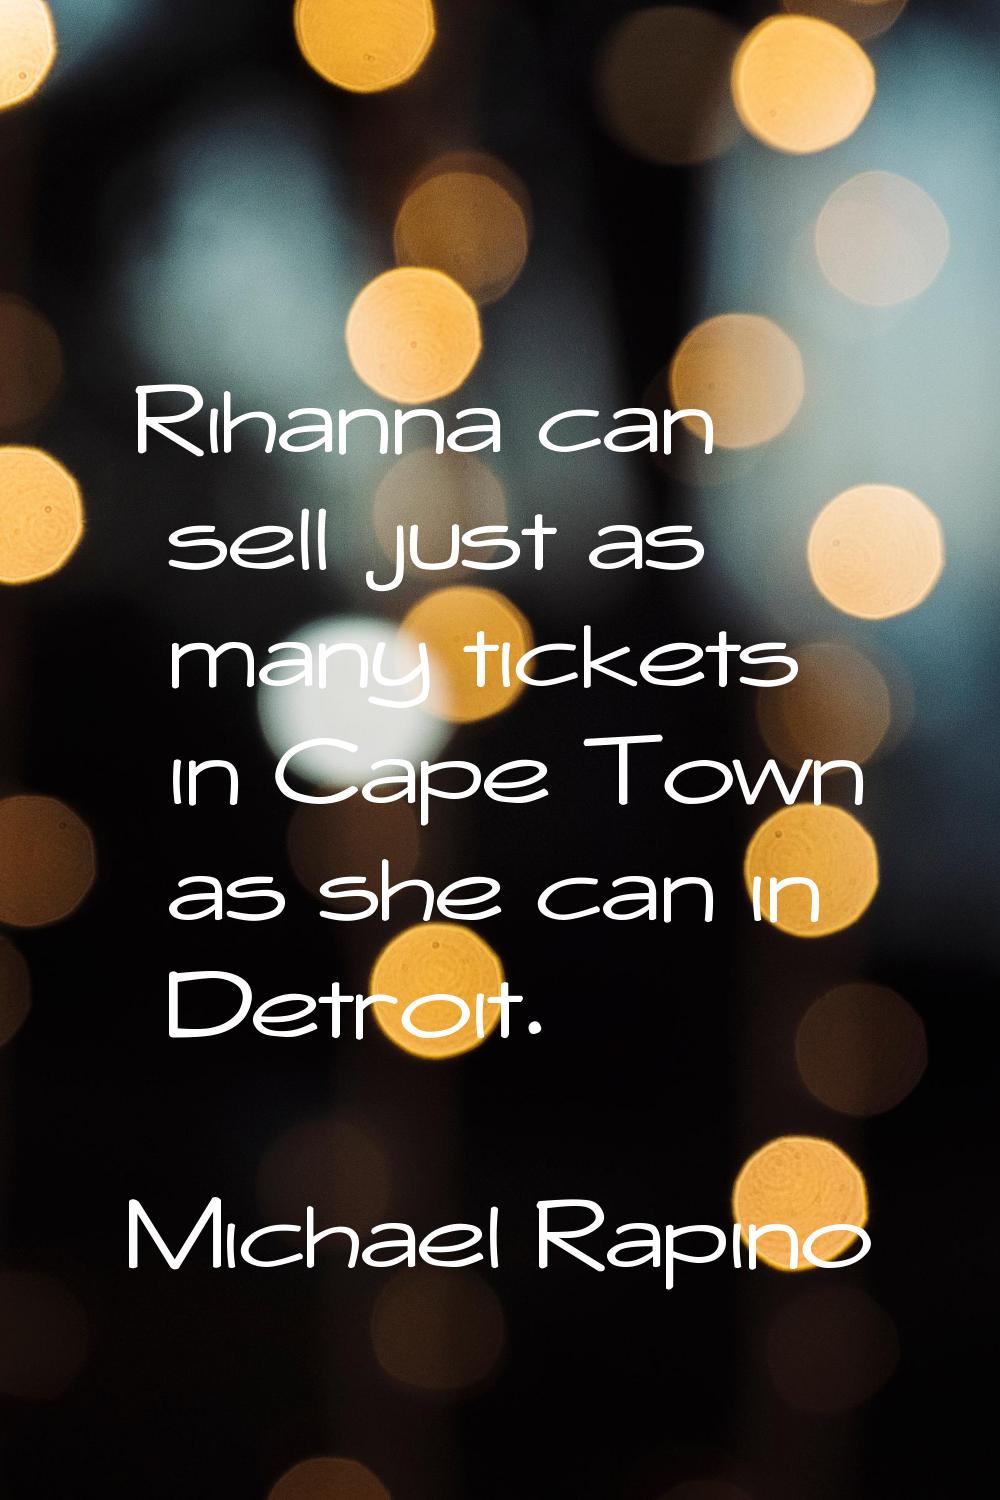 Rihanna can sell just as many tickets in Cape Town as she can in Detroit.